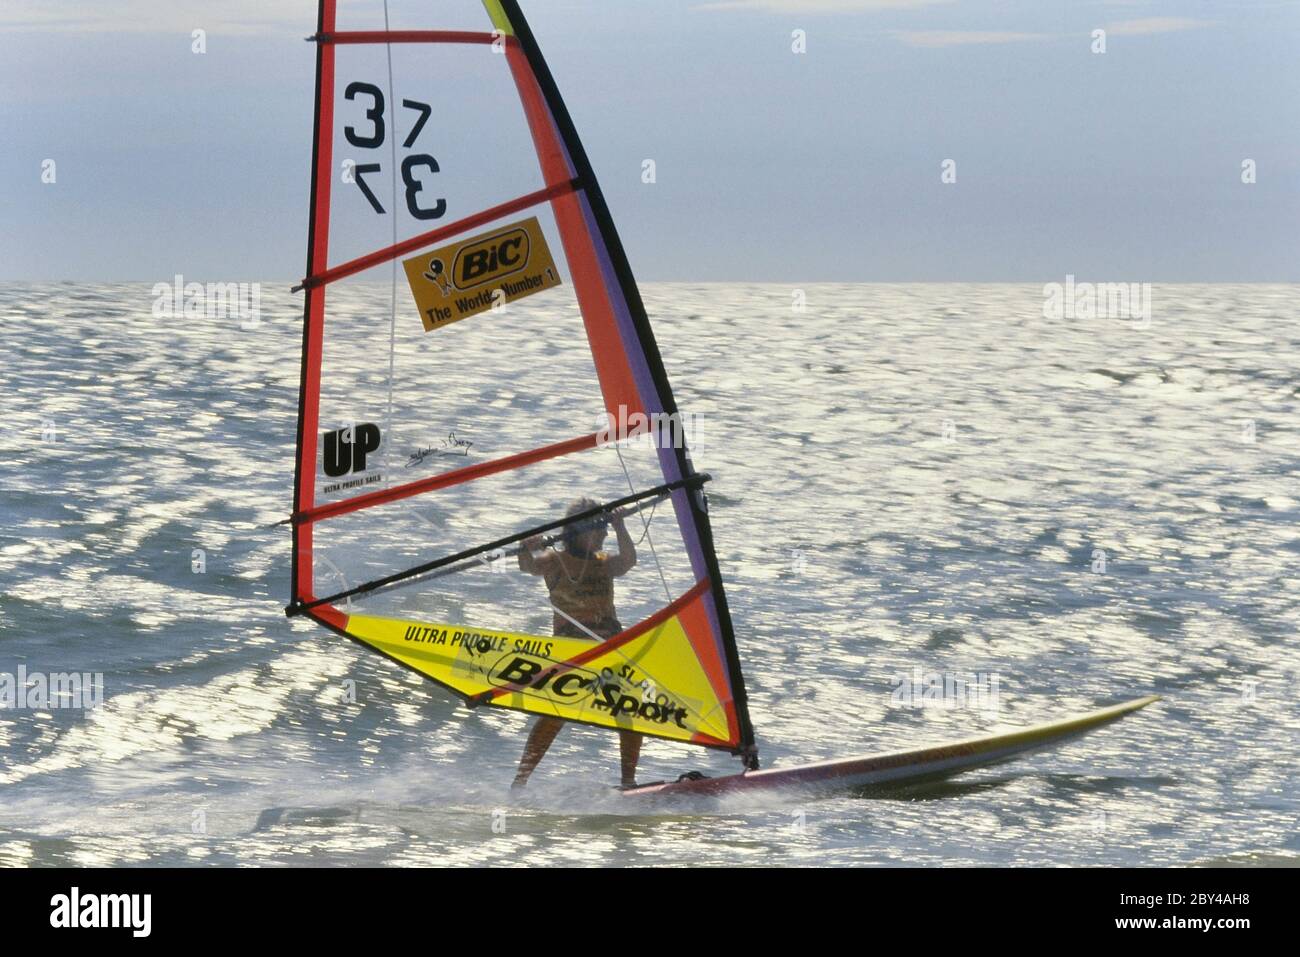 The Bic Worlds Windsurfing Championship event, Hastings, East Sussex,  England, UK. 1990 Stock Photo - Alamy